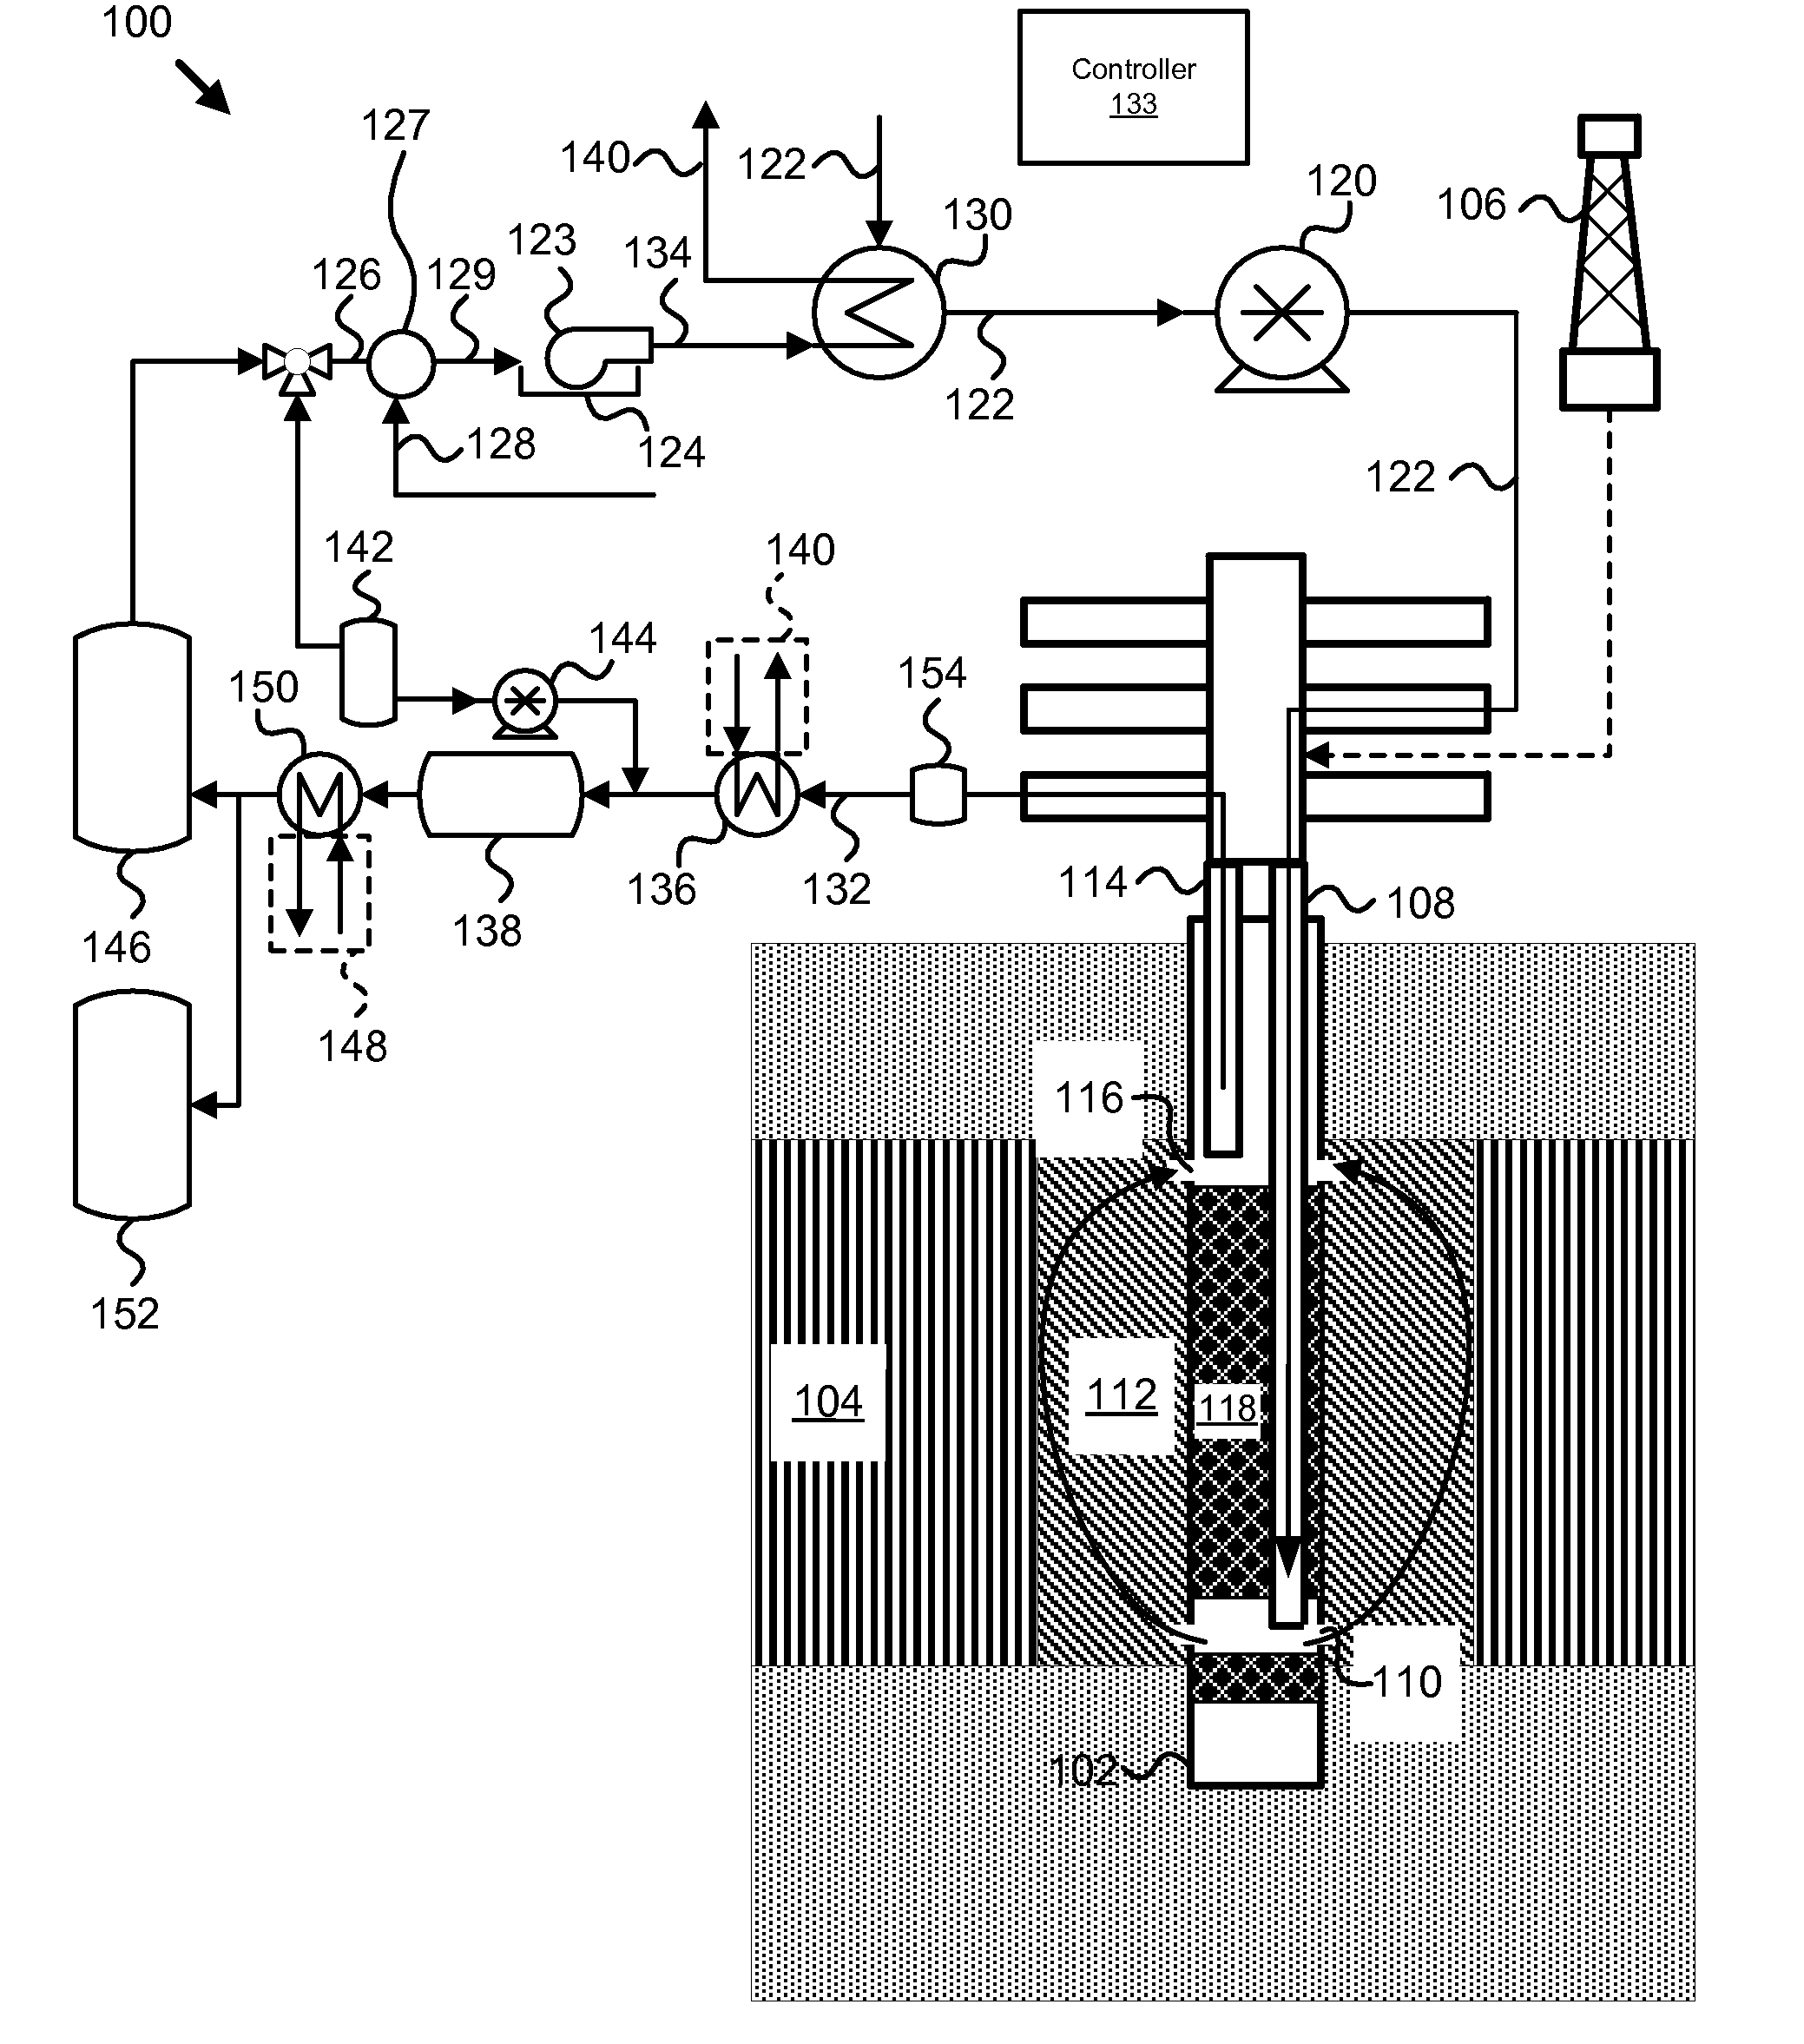 Apparatus, system, and method for in-situ extraction of hydrocarbons